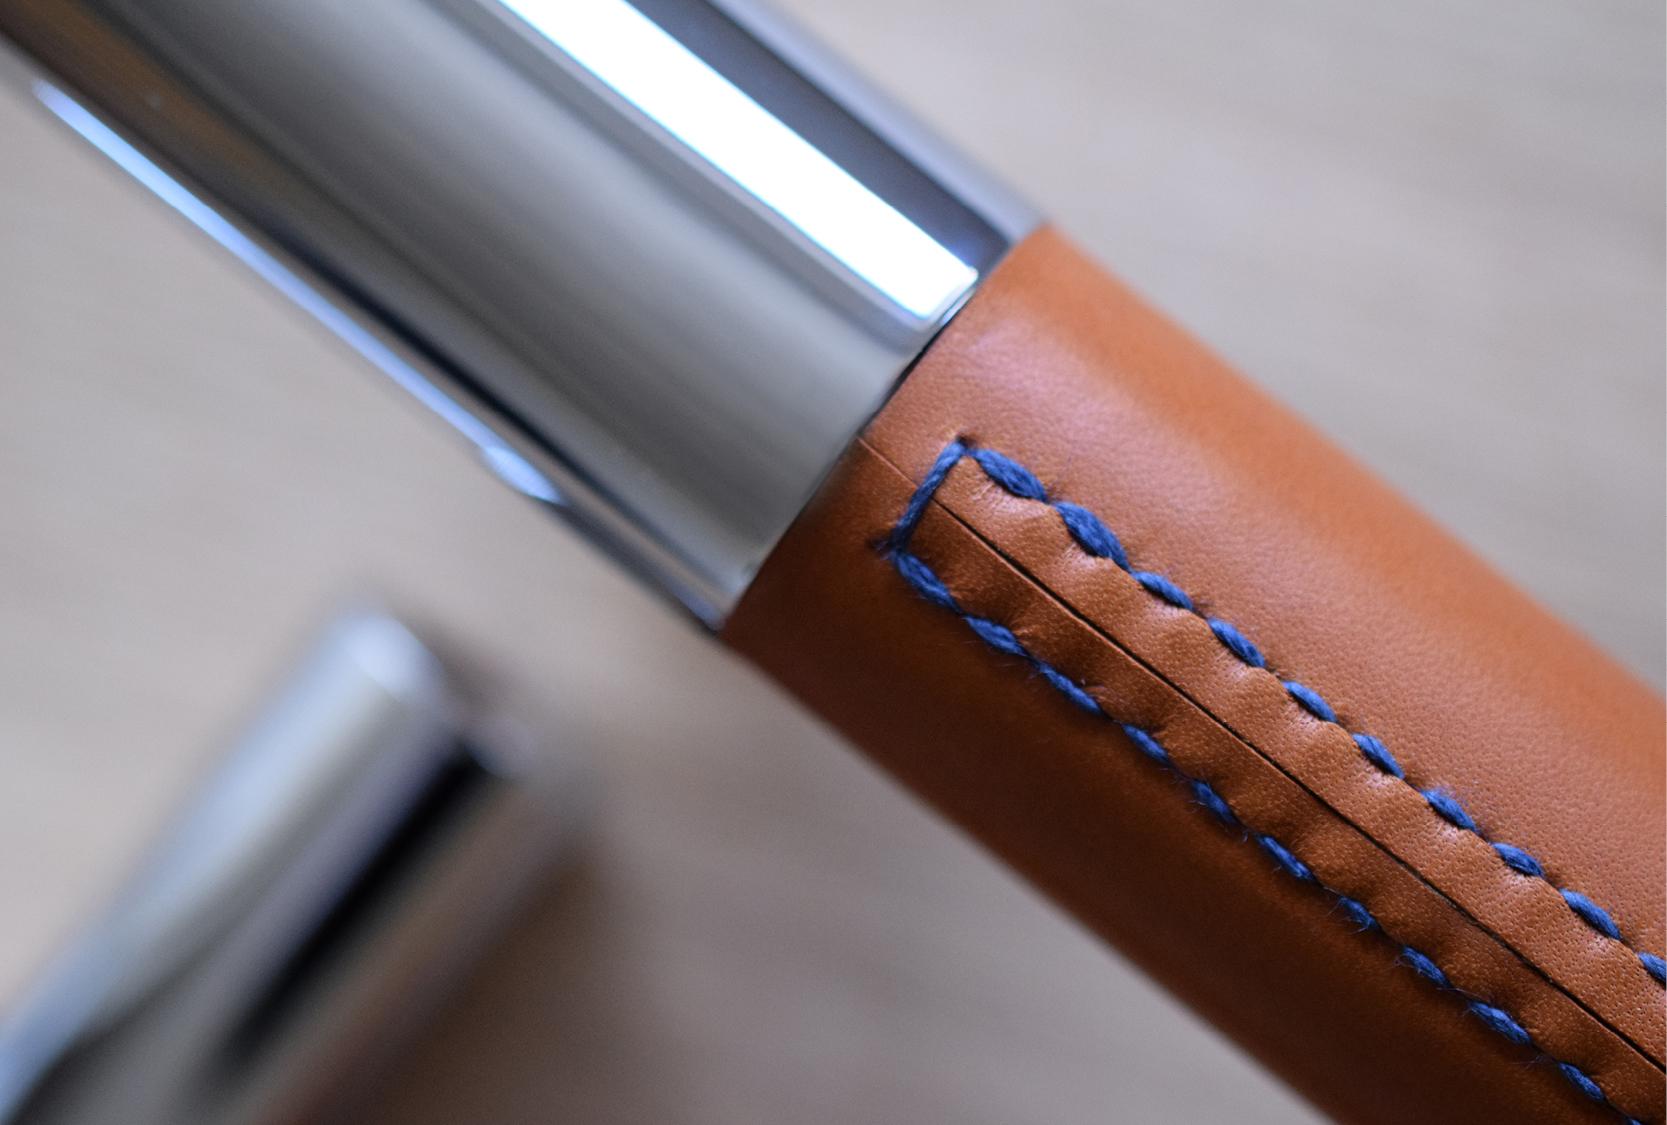 Custom large barrel pull handle with a chestnut leather and straight stitch with custom blue threads. The leather hardware is hand stitched in the Turnstyle Designs Devon based factory.